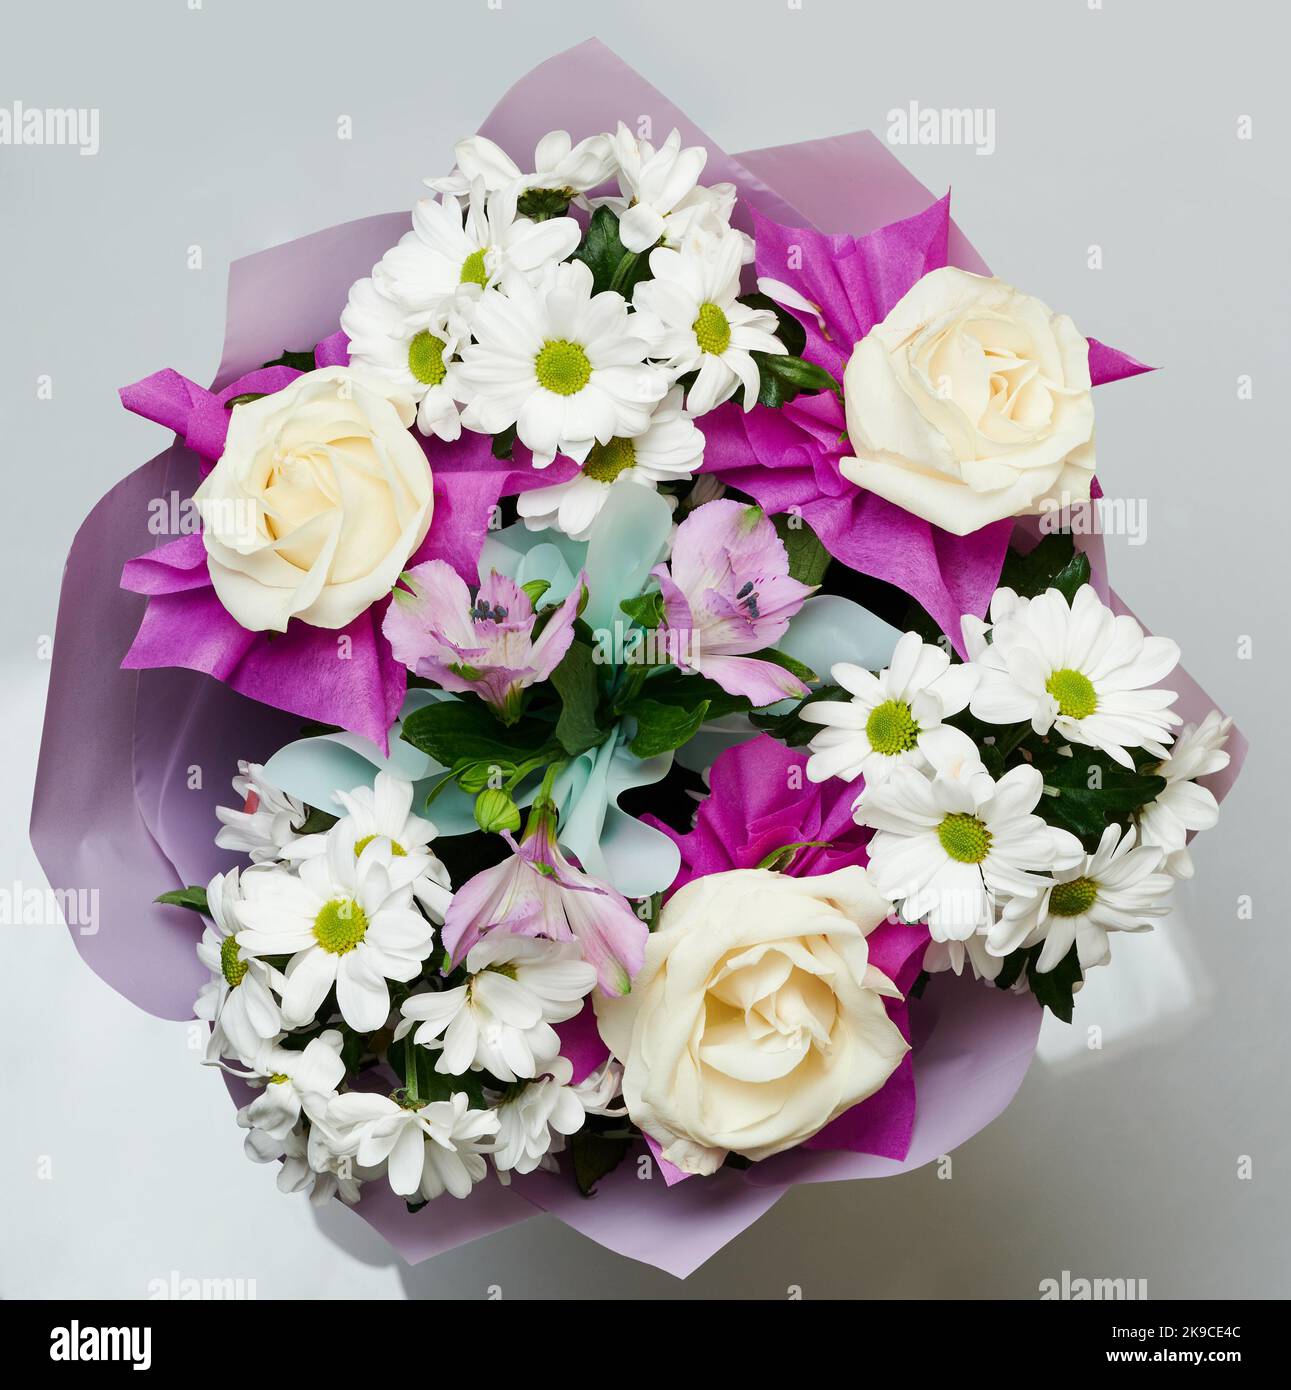 Colorful bouquet flower isolated on studio background above view Stock Photo